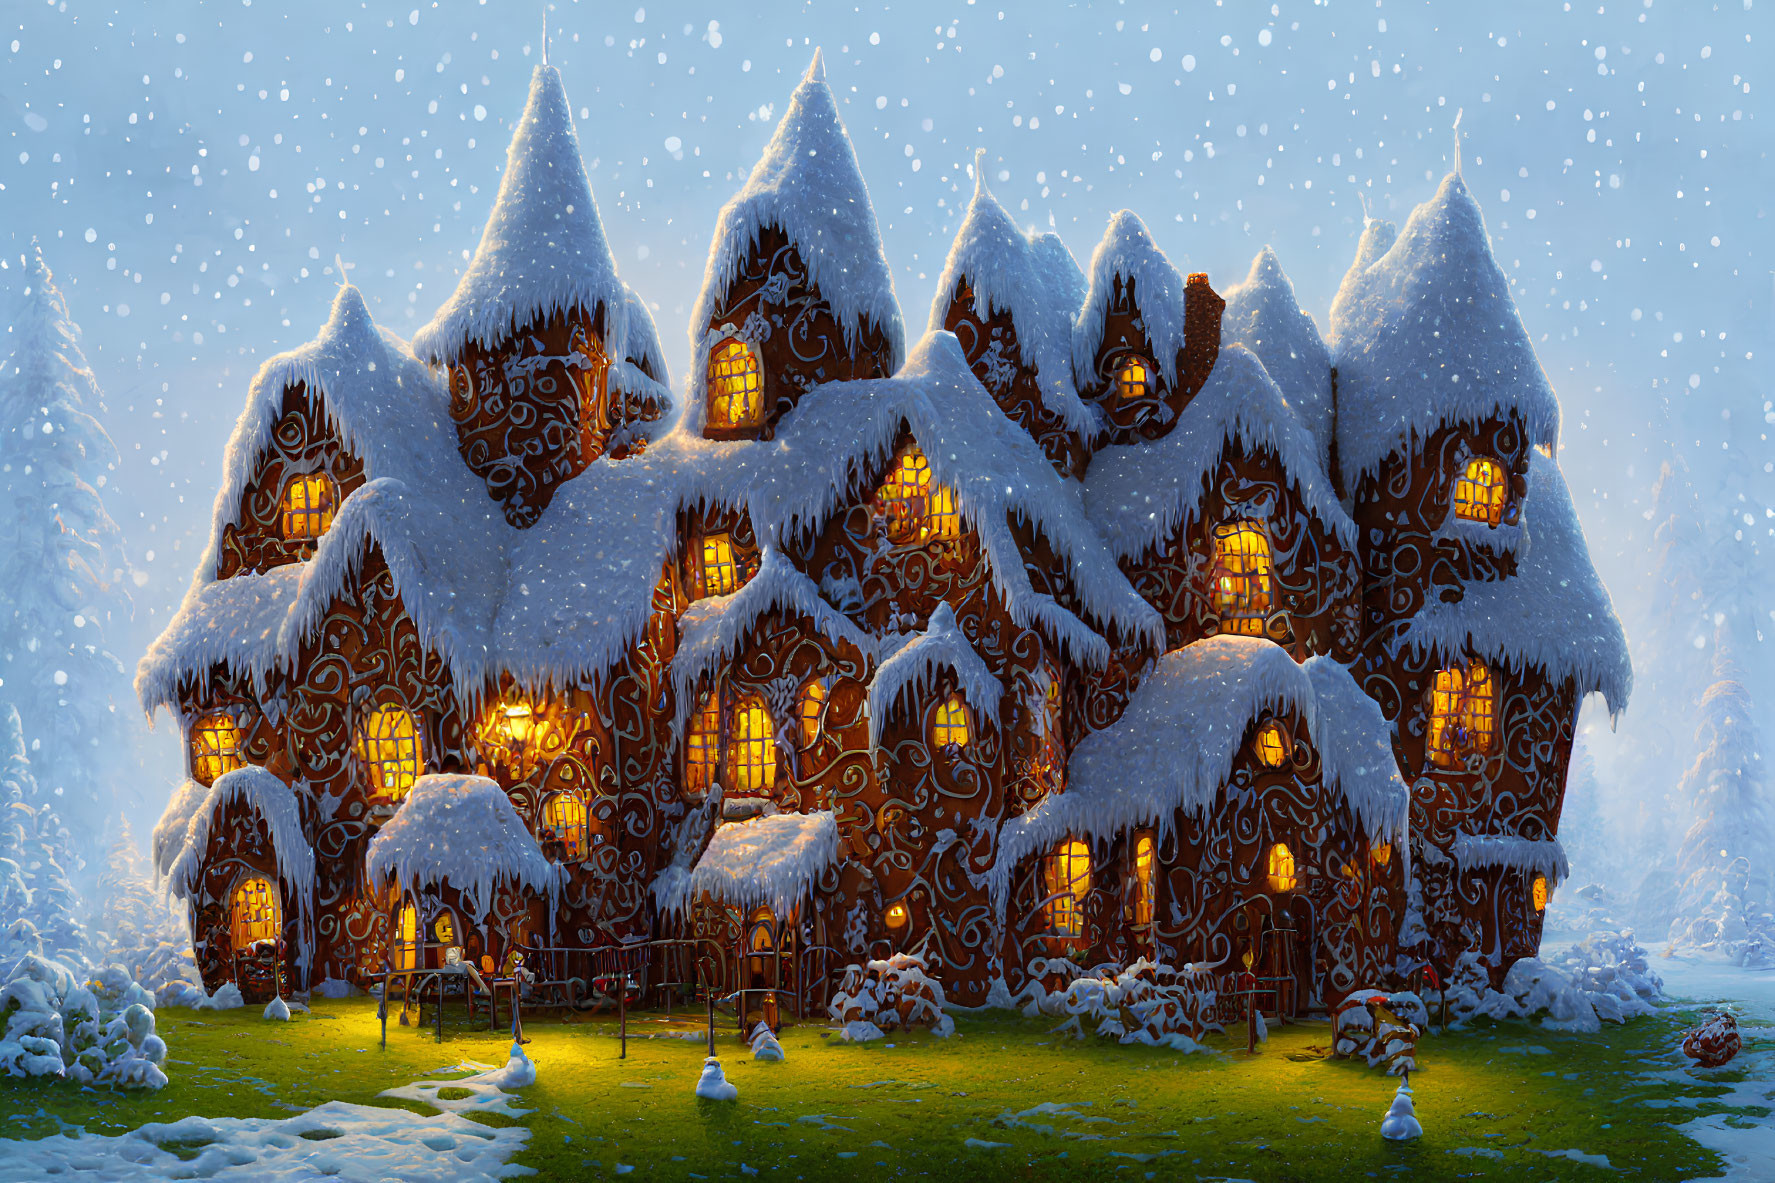 Snow-covered gingerbread village at night with warmly lit windows, snowy trees, starry sky.